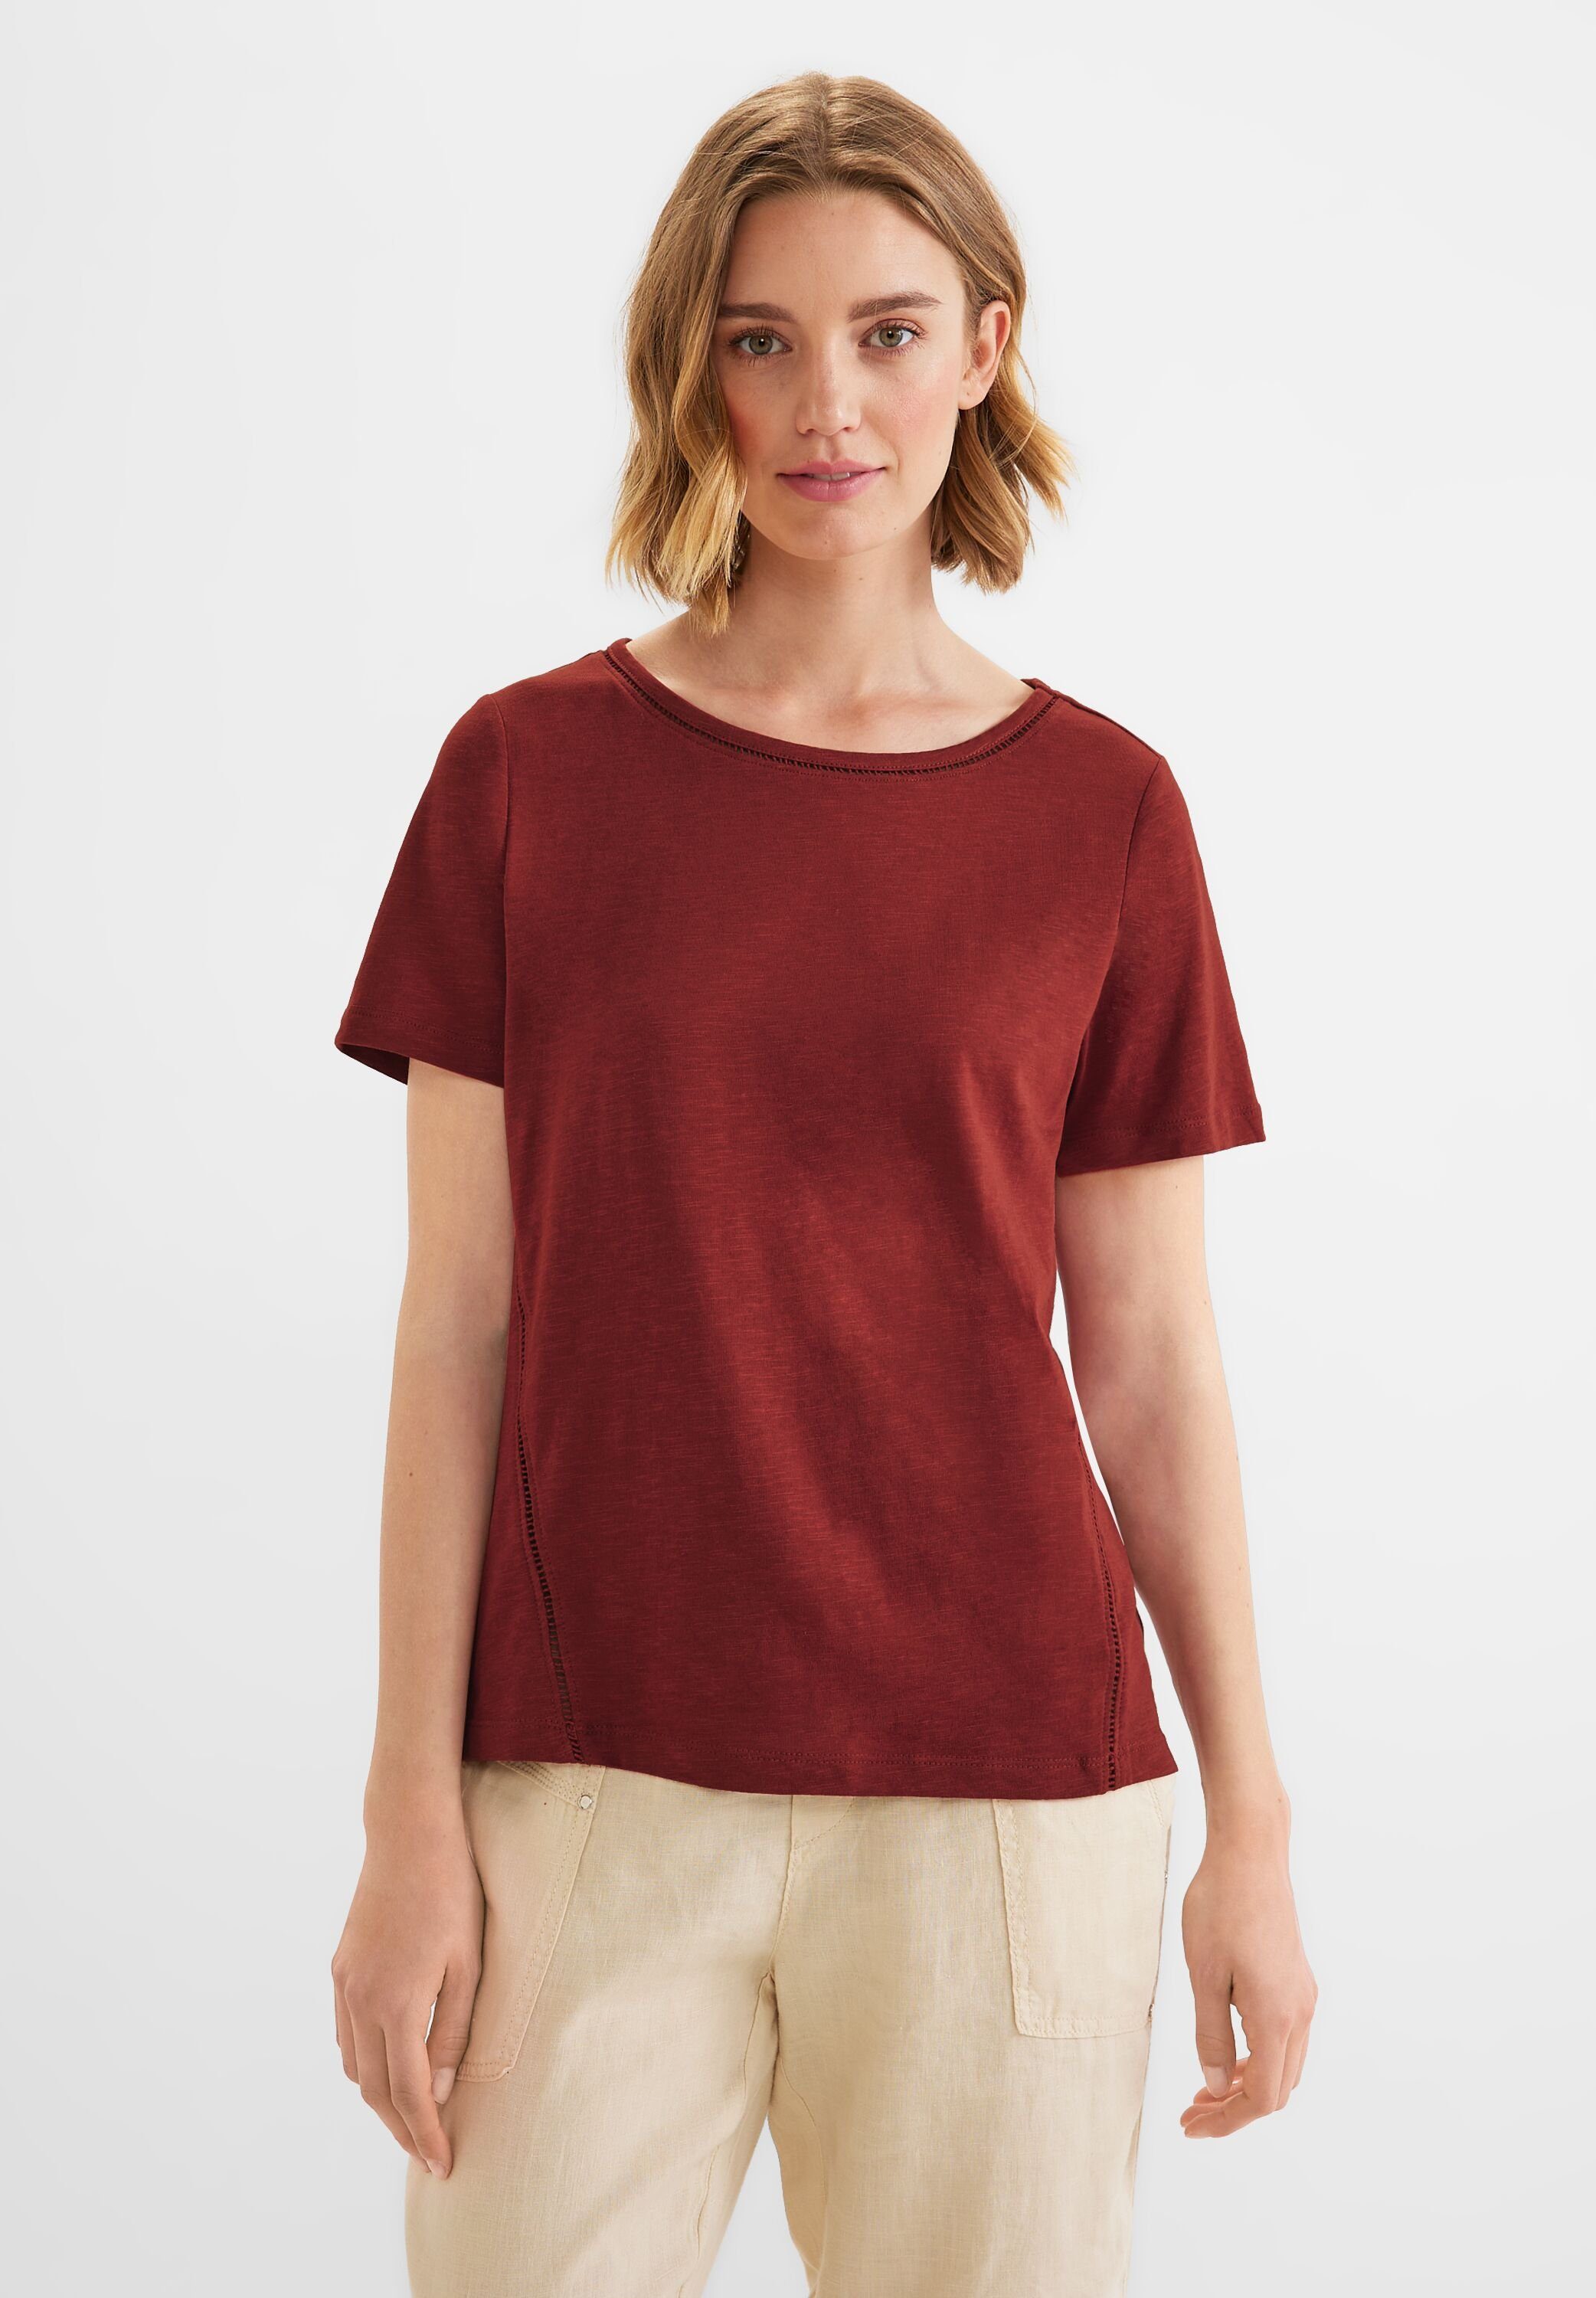 STREET foxy ONE in T-Shirt Unifarbe red